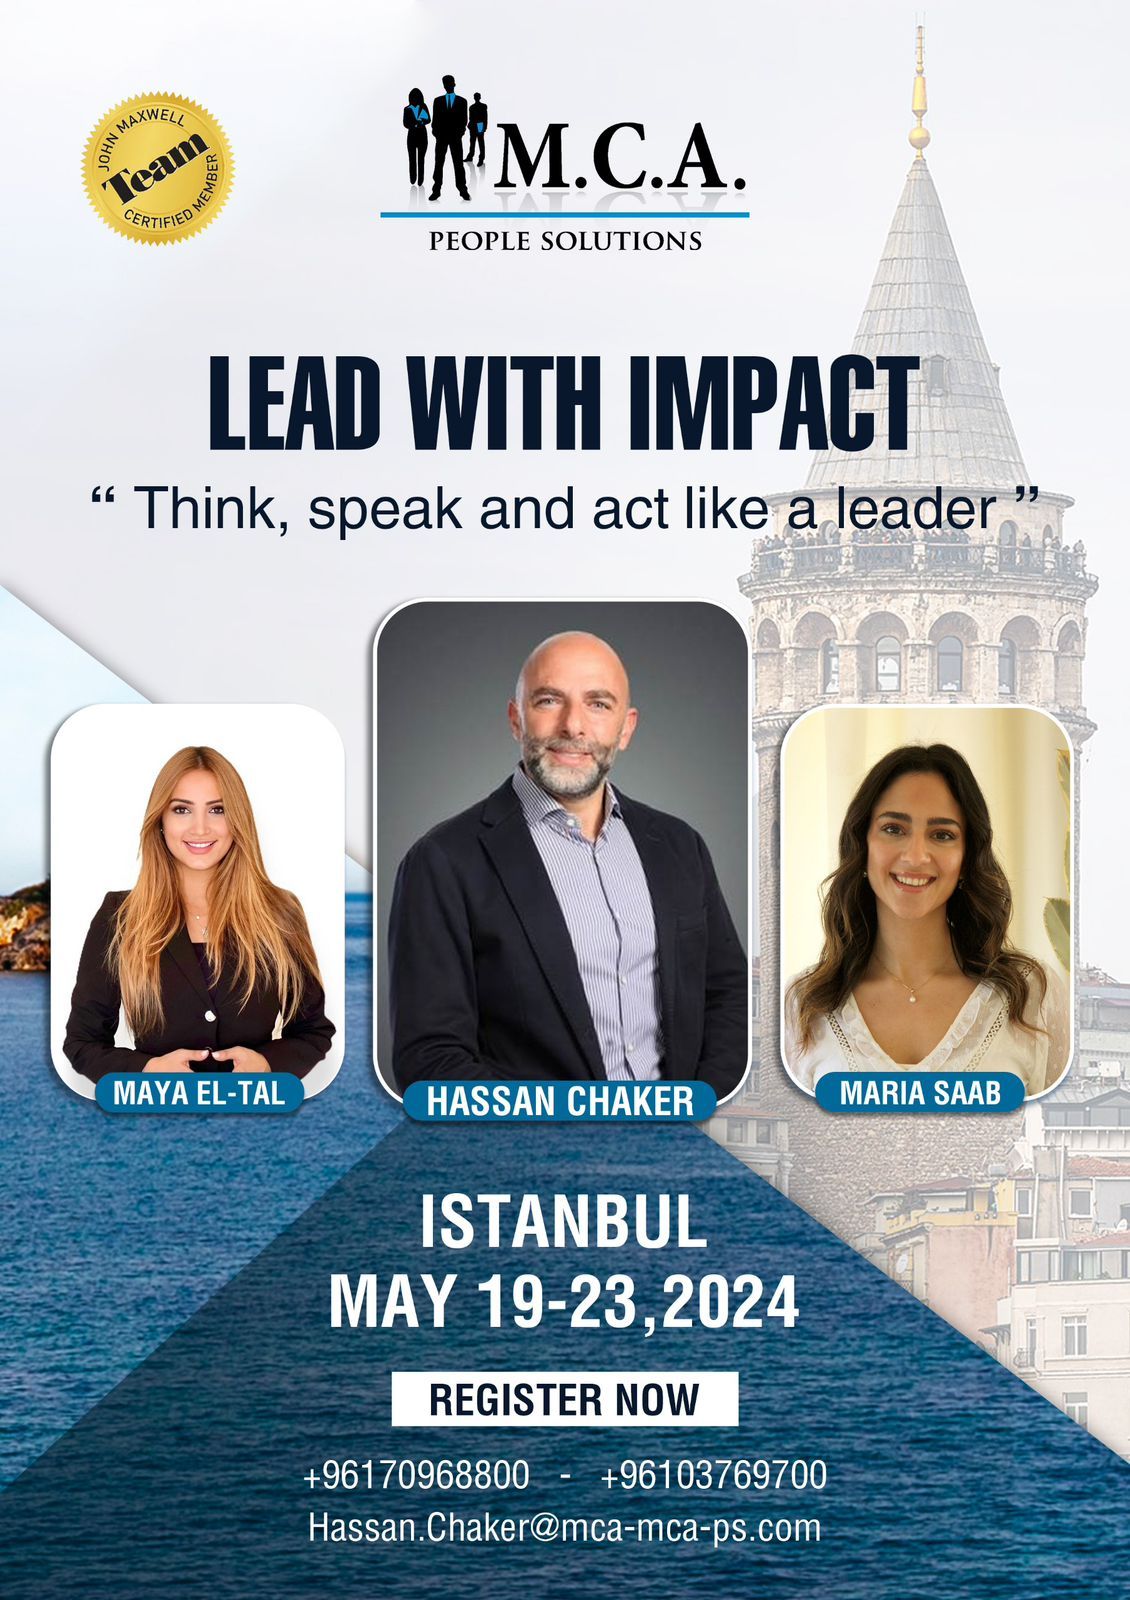 Lead with IMPACT